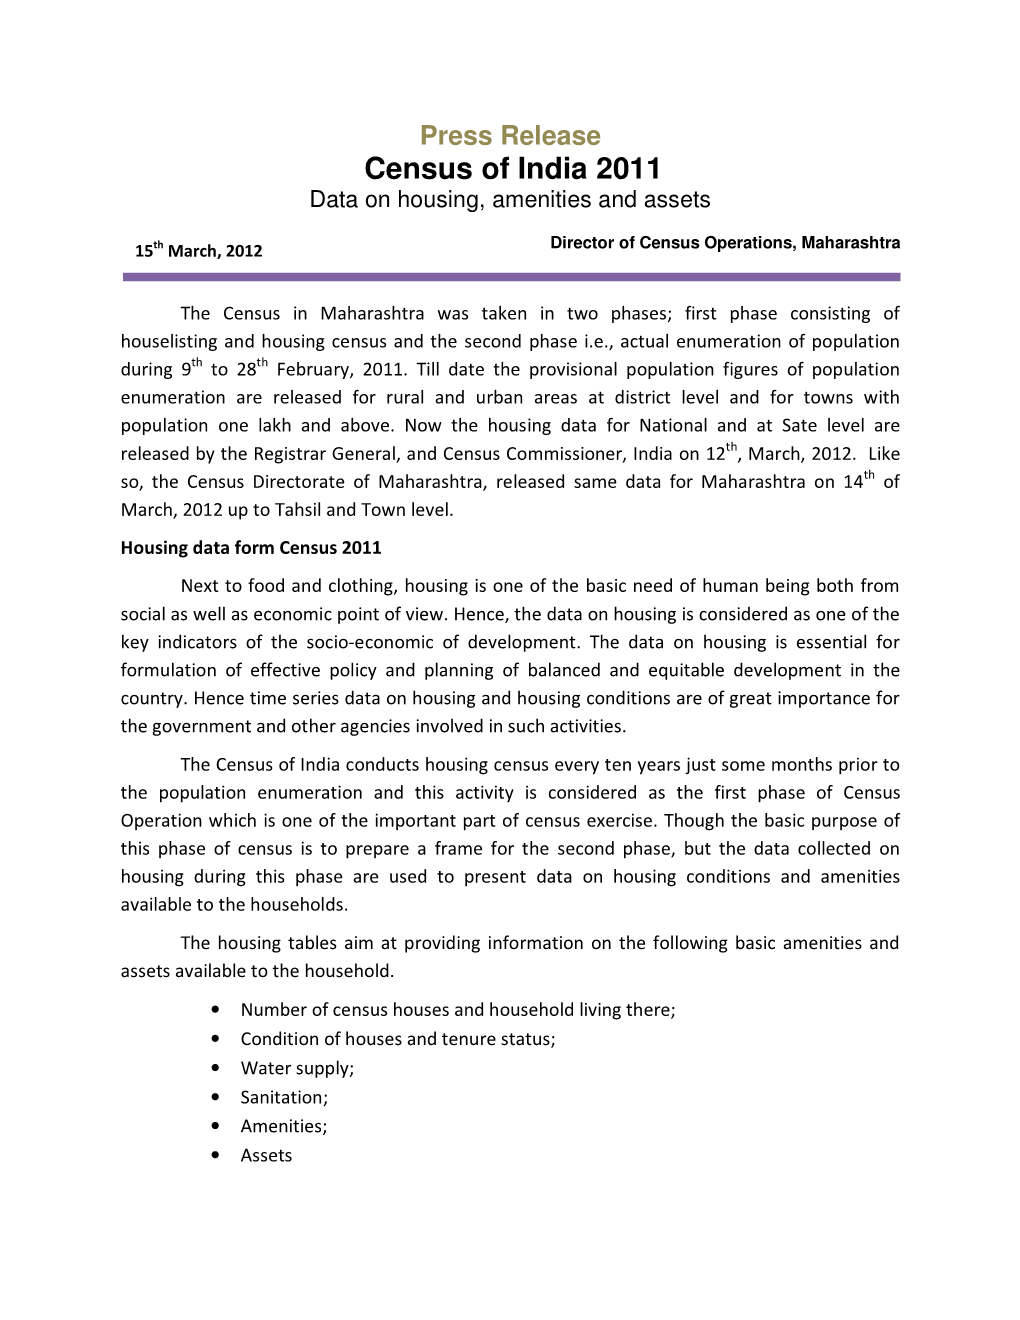 Census of India 2011 Data on Housing, Amenities and Assets